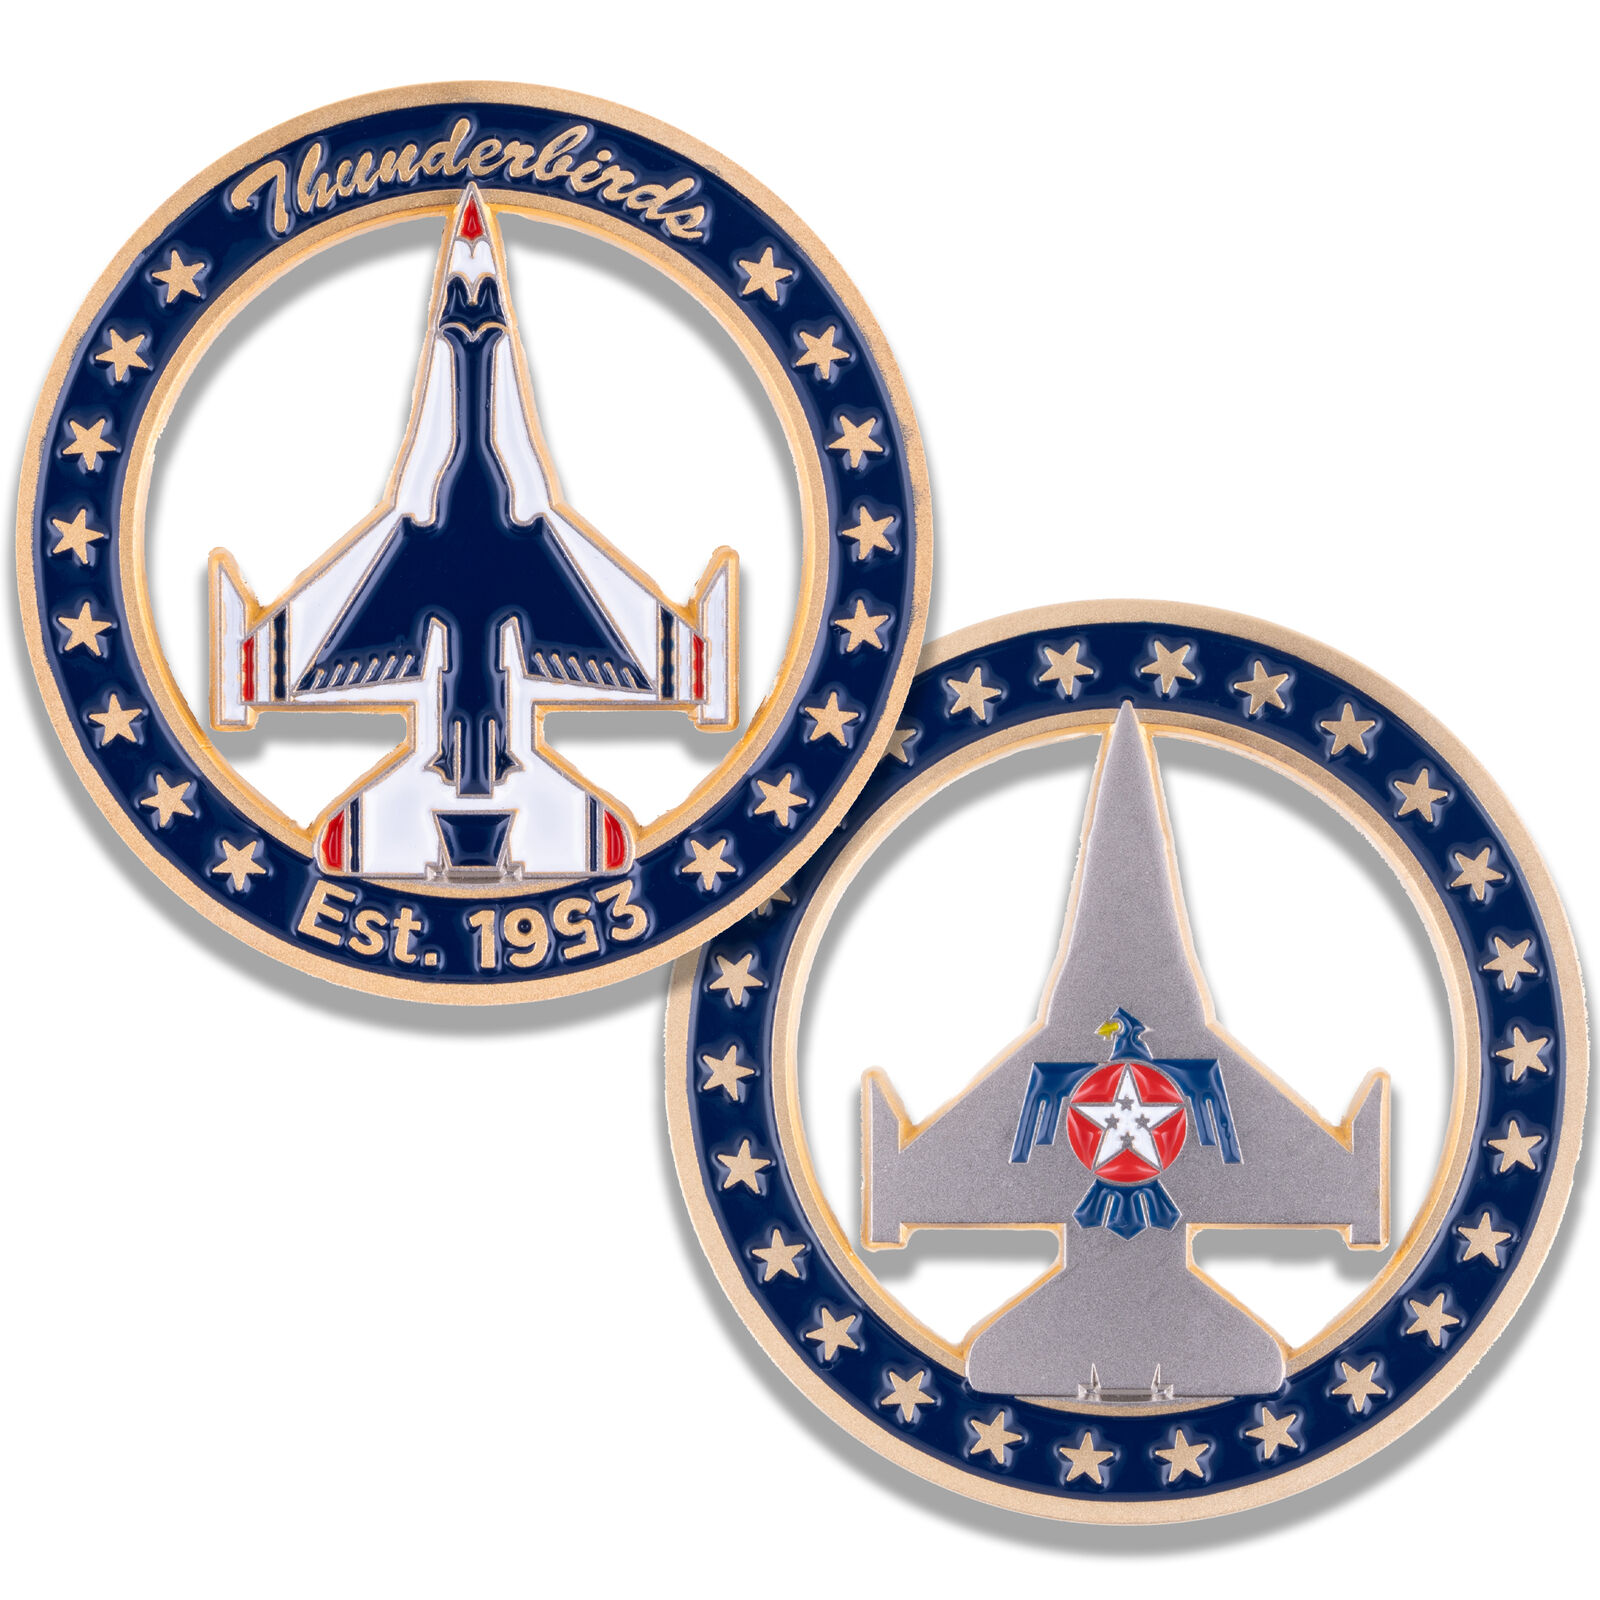 Thunderbirds Limited Edition Challenge Coin